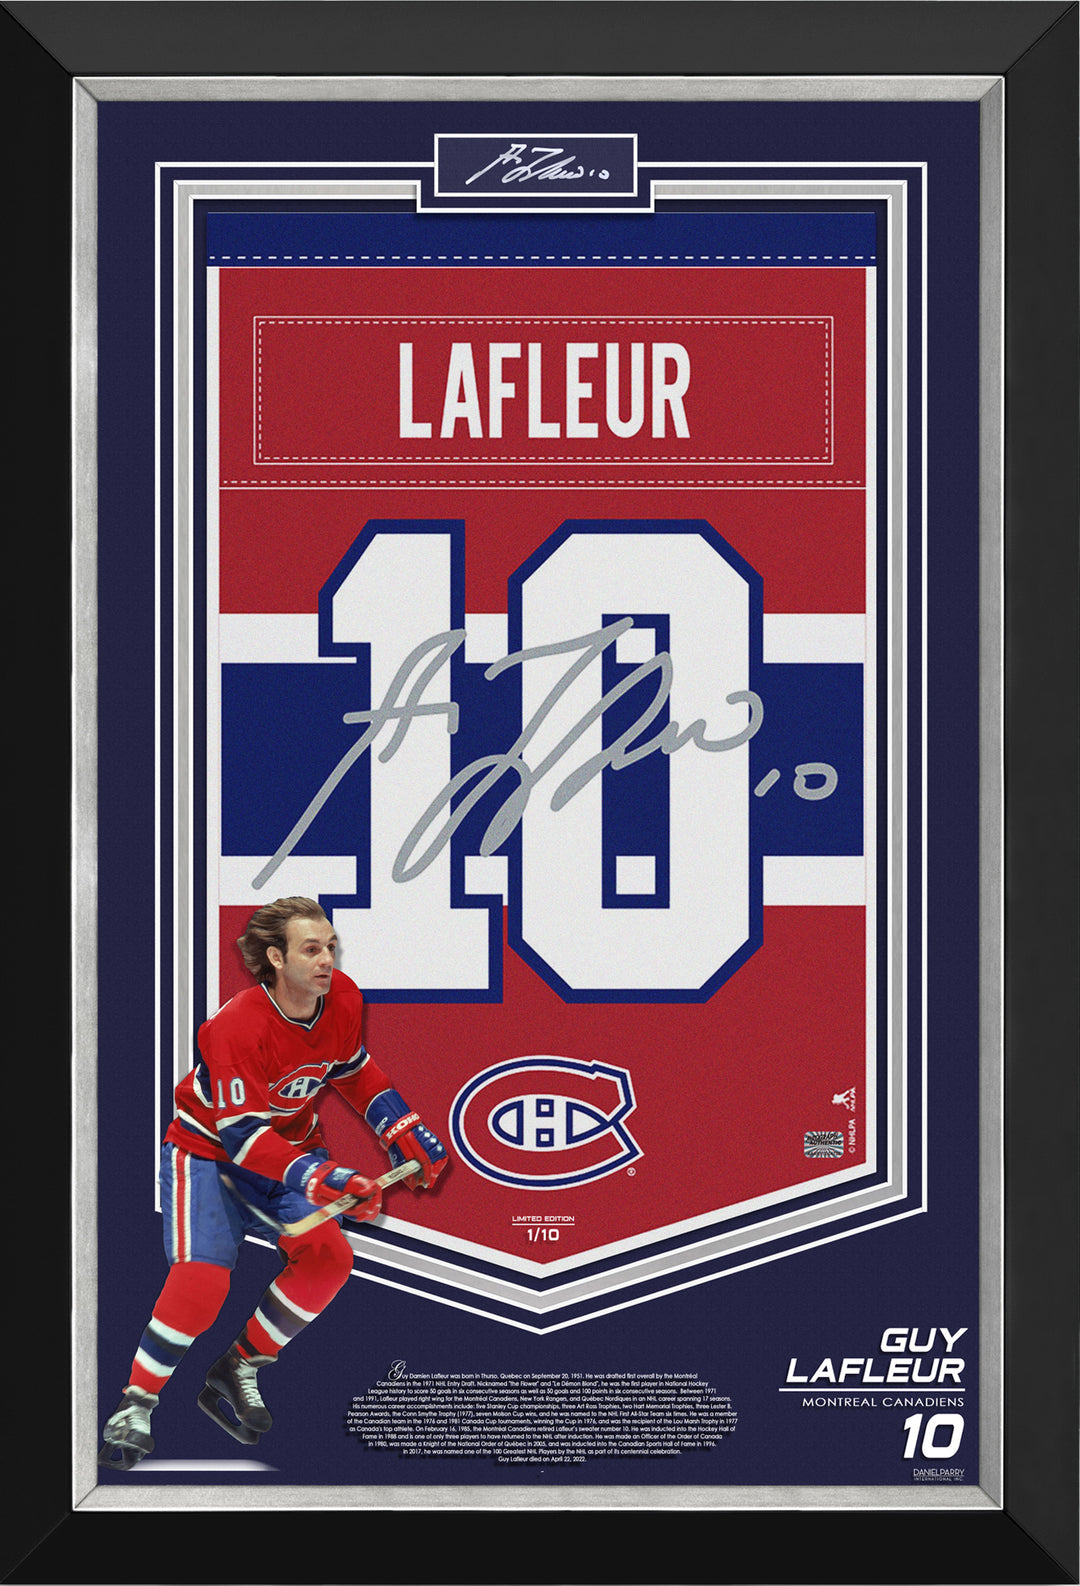 Guy Lafleur Framed Arena Banner Limited Edition #1 Of 10 Cut Signature, Montreal Canadiens, NHL, Hockey, Autographed, Signed, AAABH33029